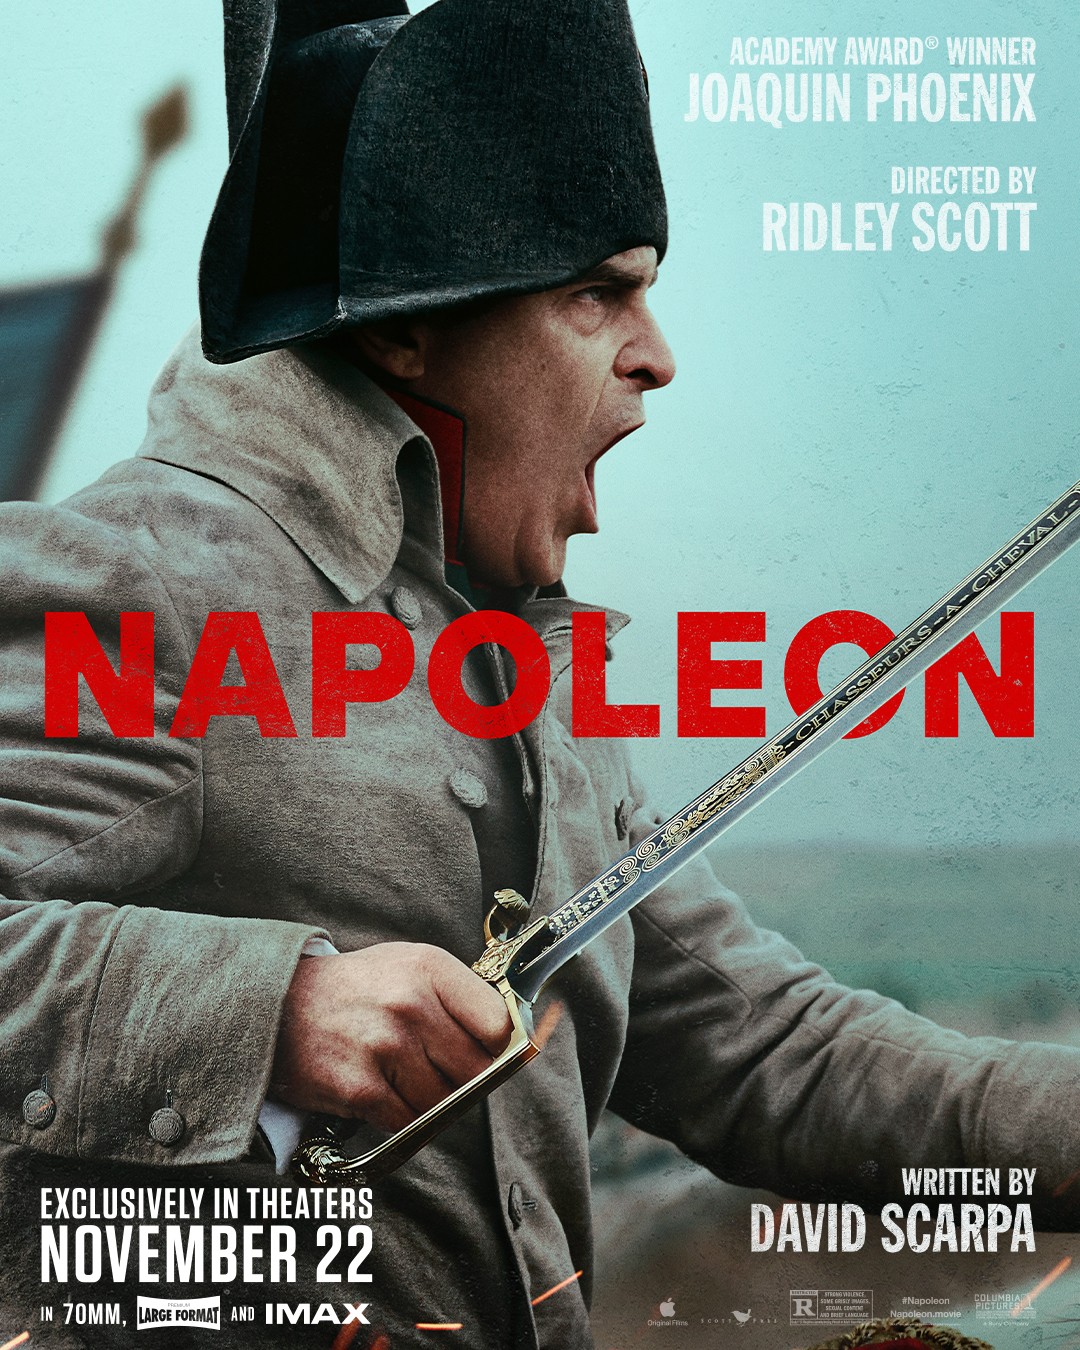 Your Next 10 Steps After Watching the New 'Napoleon' Film - The